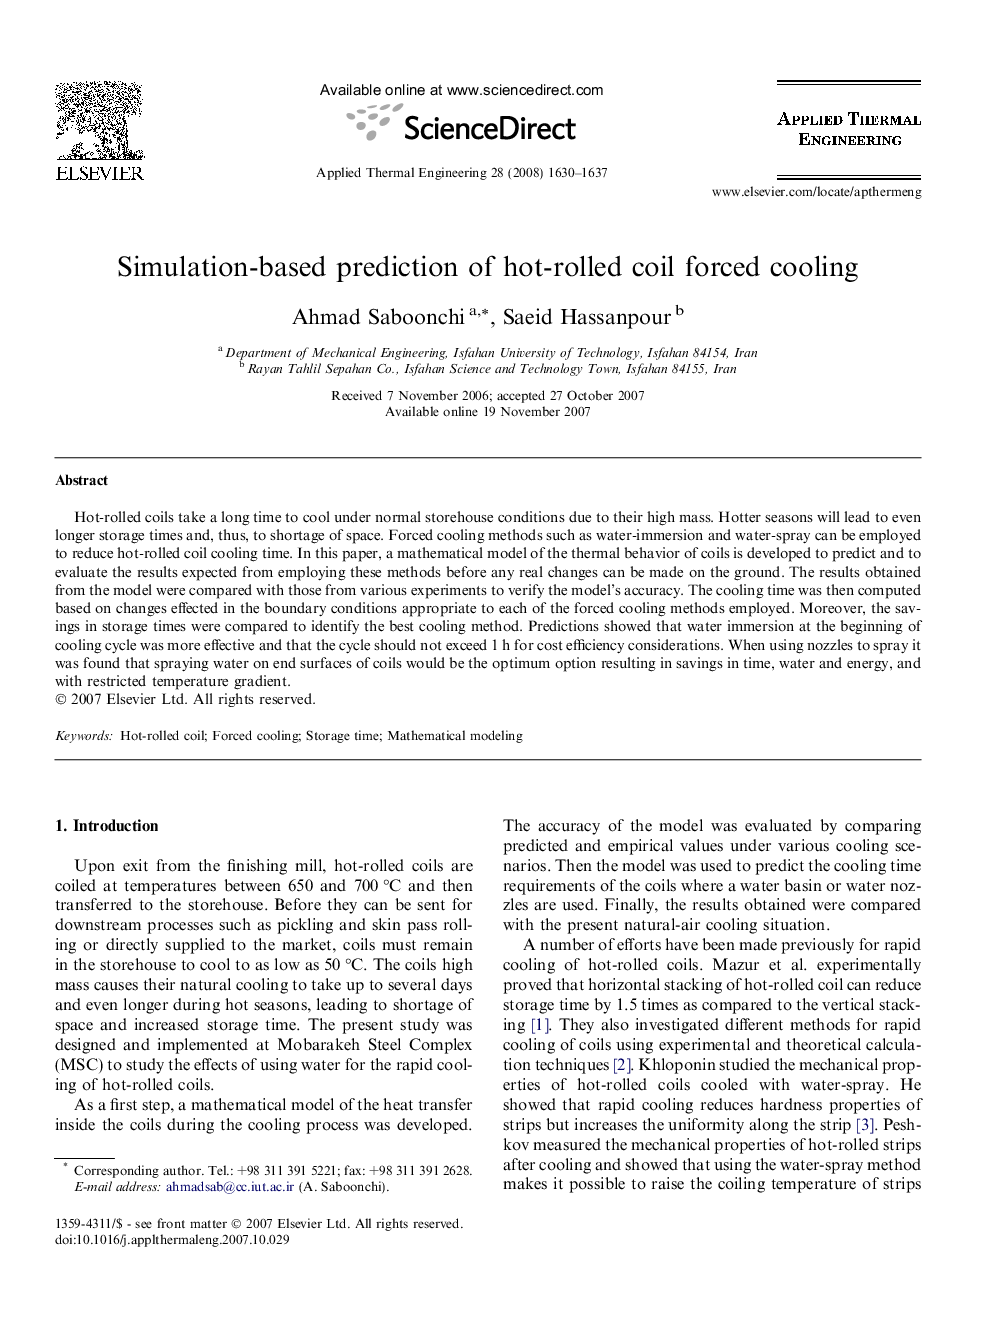 Simulation-based prediction of hot-rolled coil forced cooling